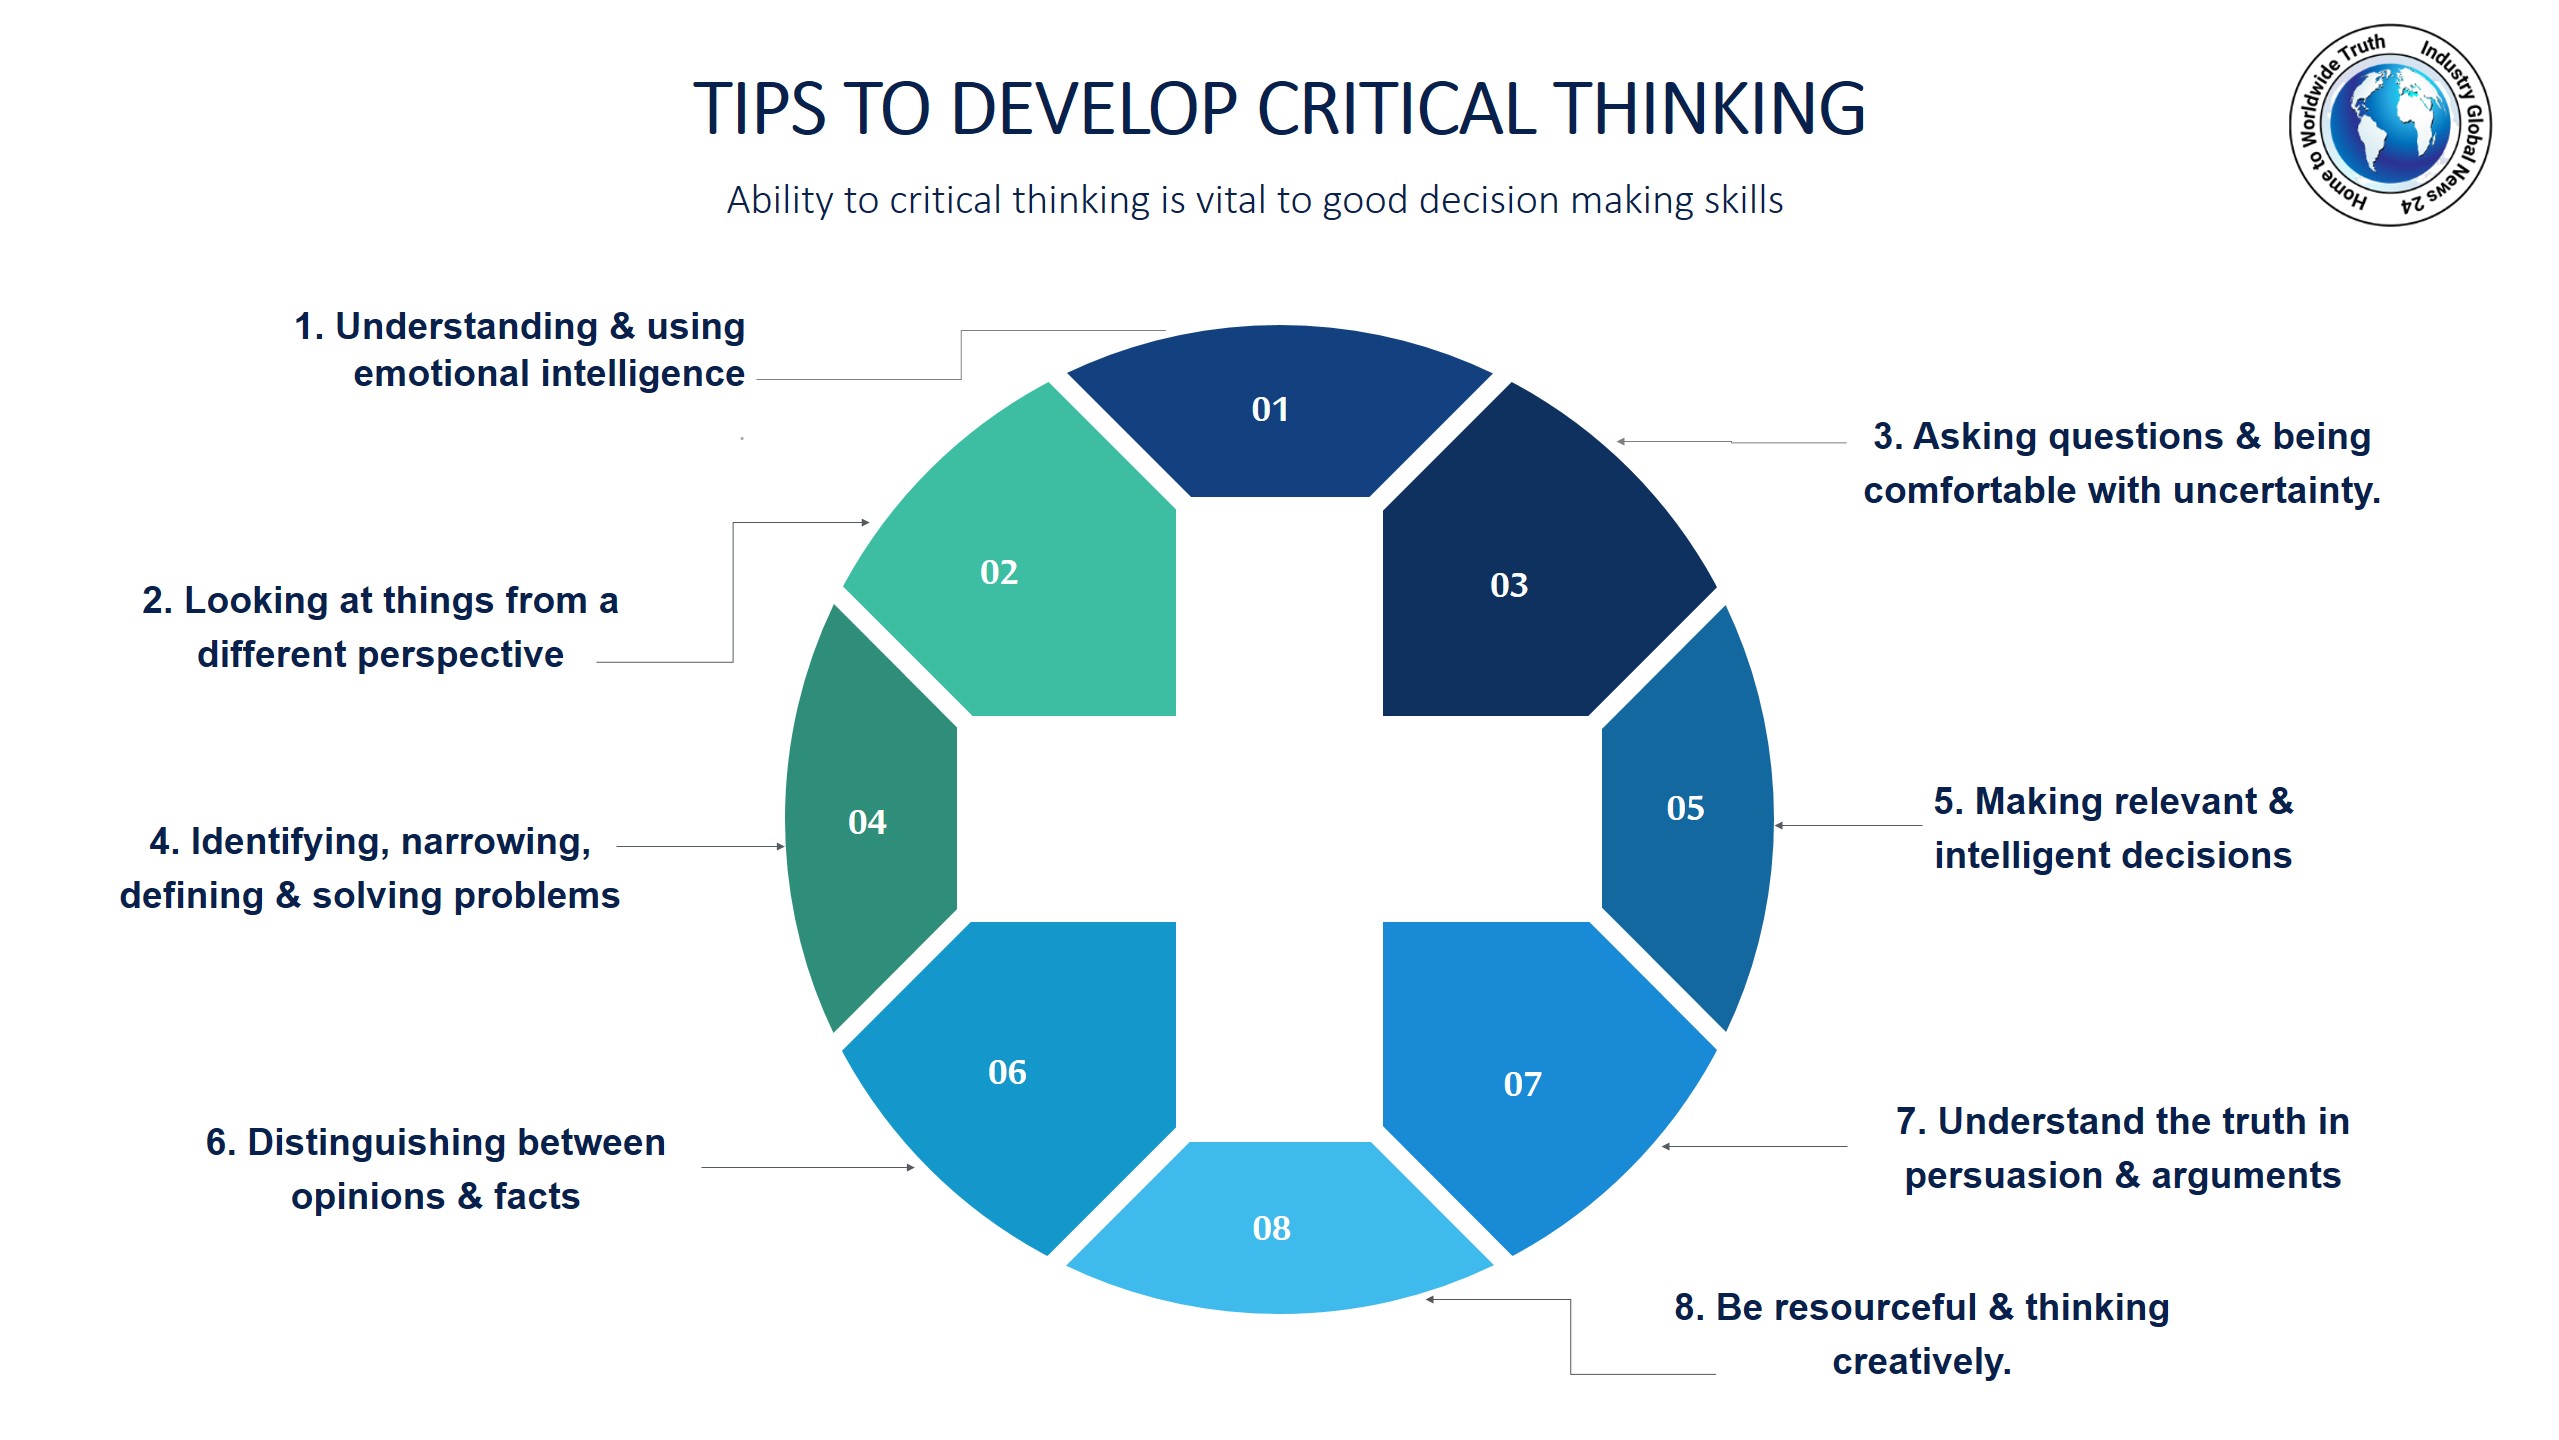 Tips to develop critical thinking